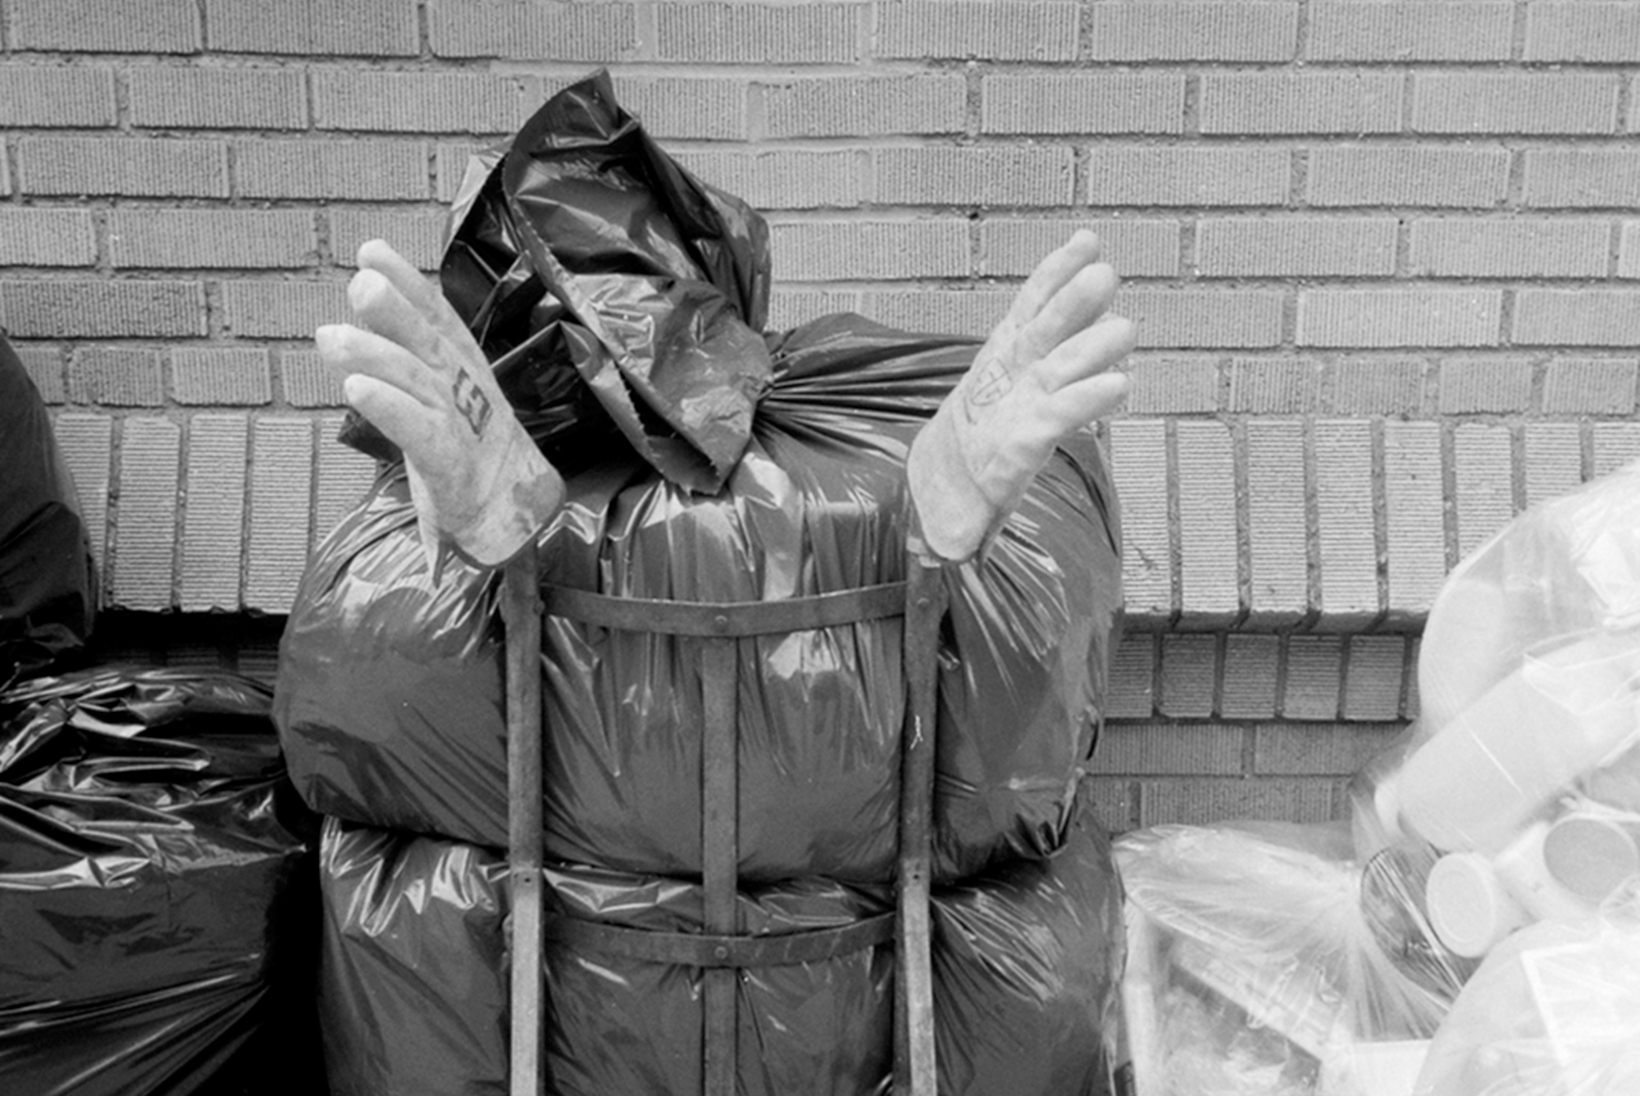 A dolly holding three trash bags is in front of a brick building. The gathered part of the topmost bag is sticking up and atop each dolly handle is a glove so that it looks like the front of a person whose head is tilted to the right.